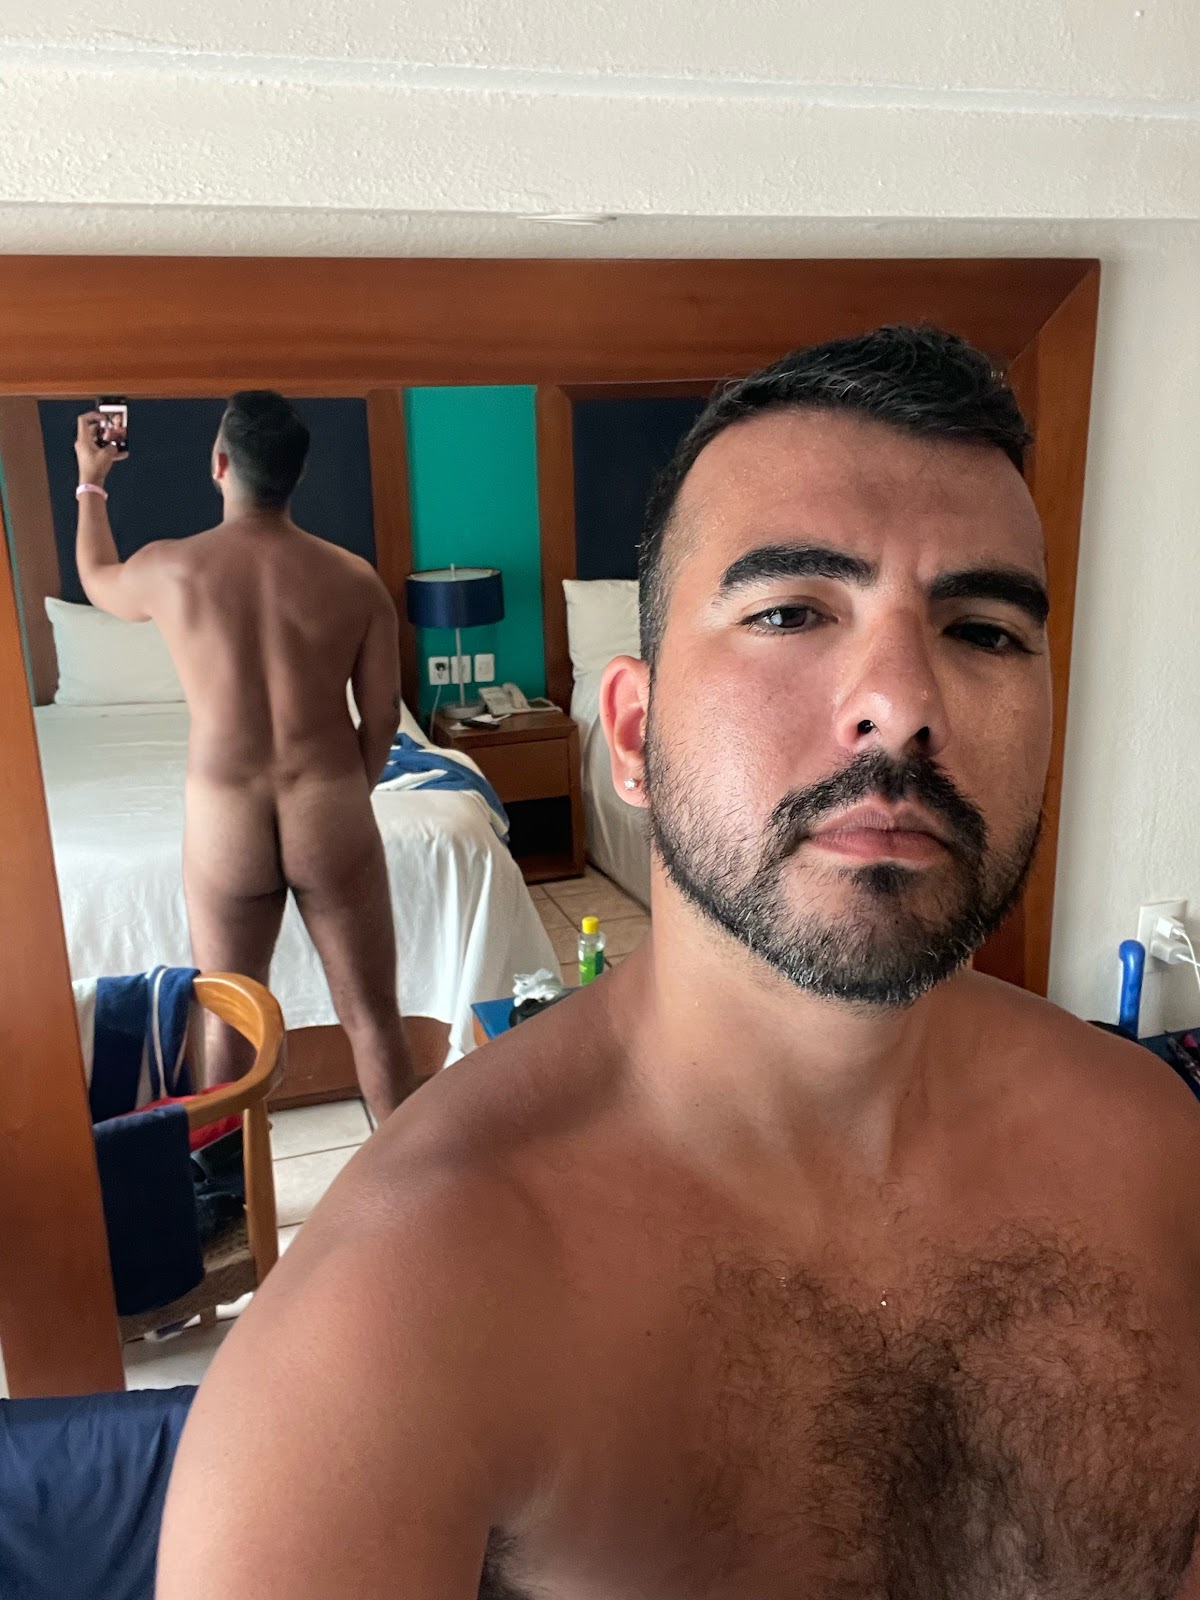 gay male wearing nothing in mexico PV hotel room taking a mirror iphone selfie 